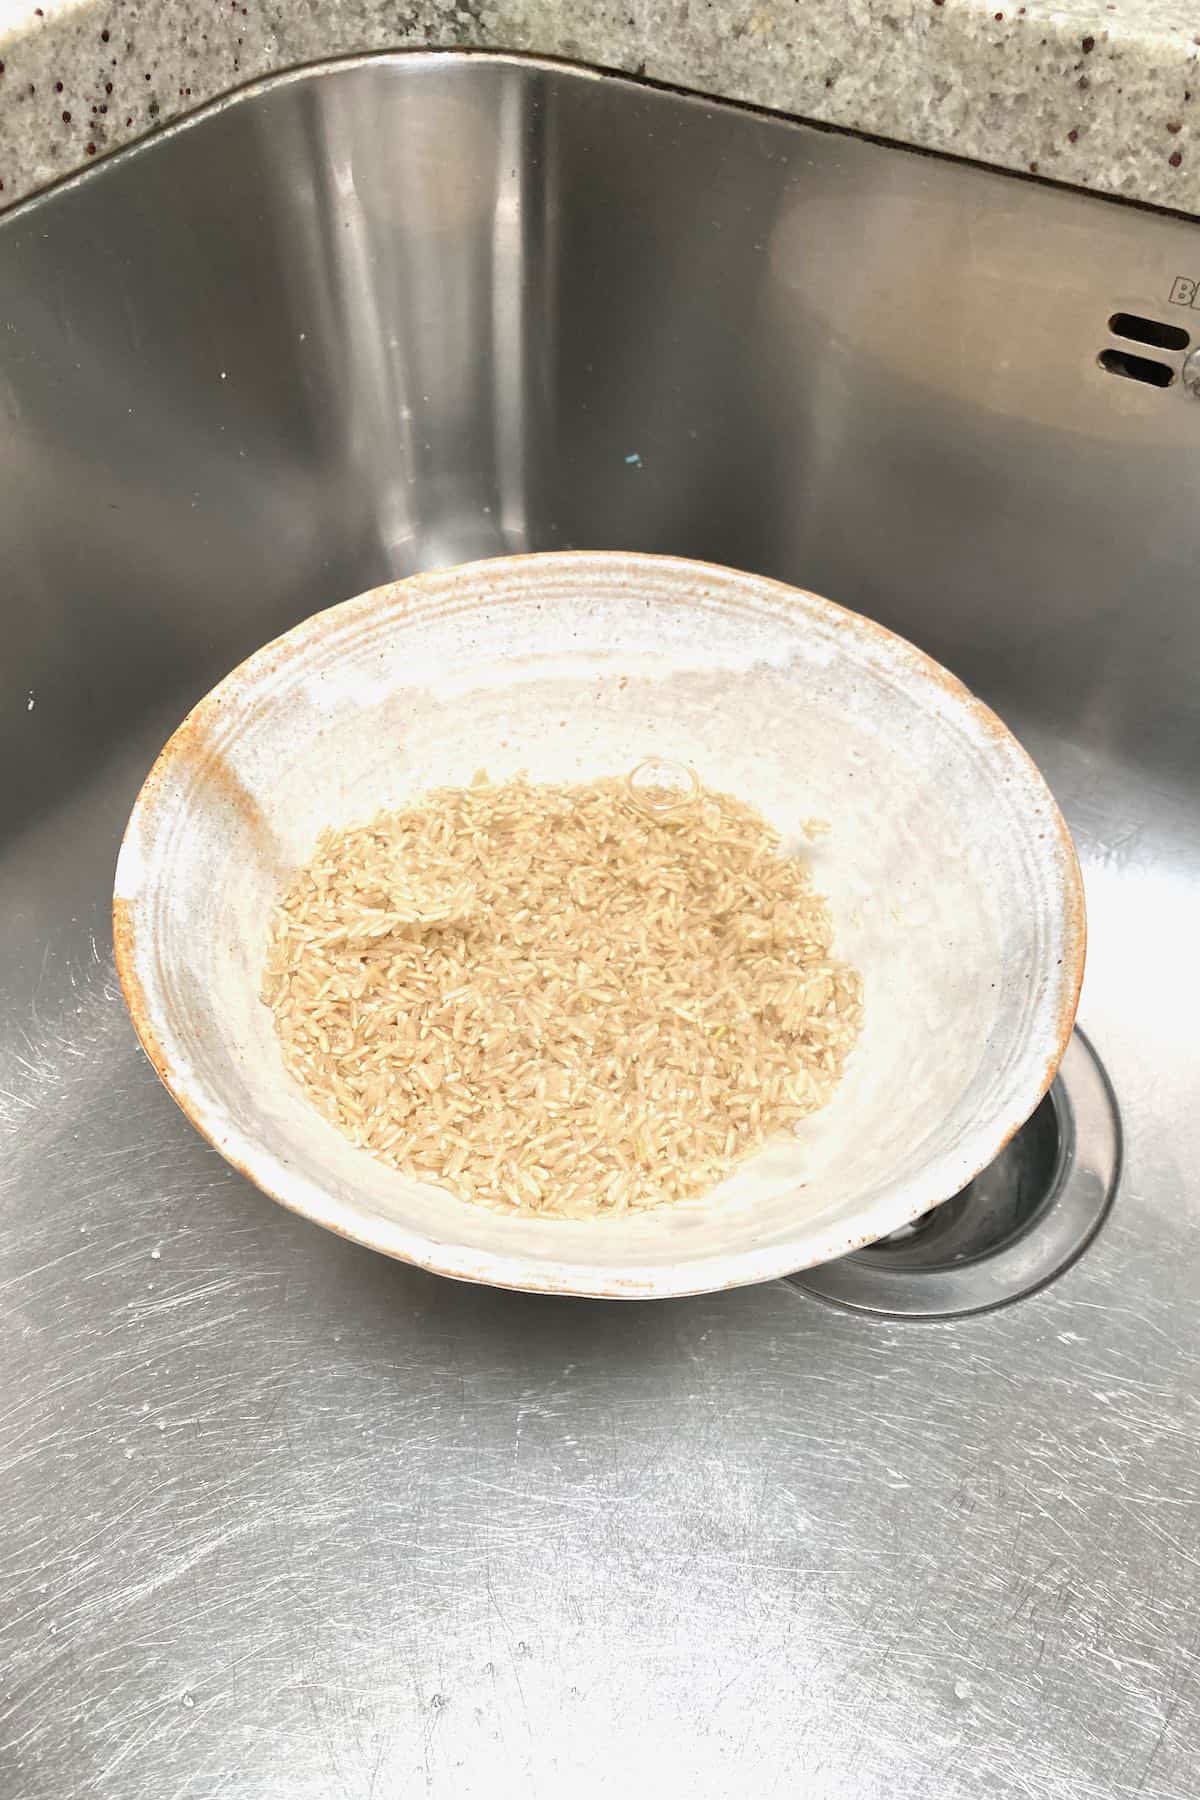 Rinsing rice in a bowl in the sink